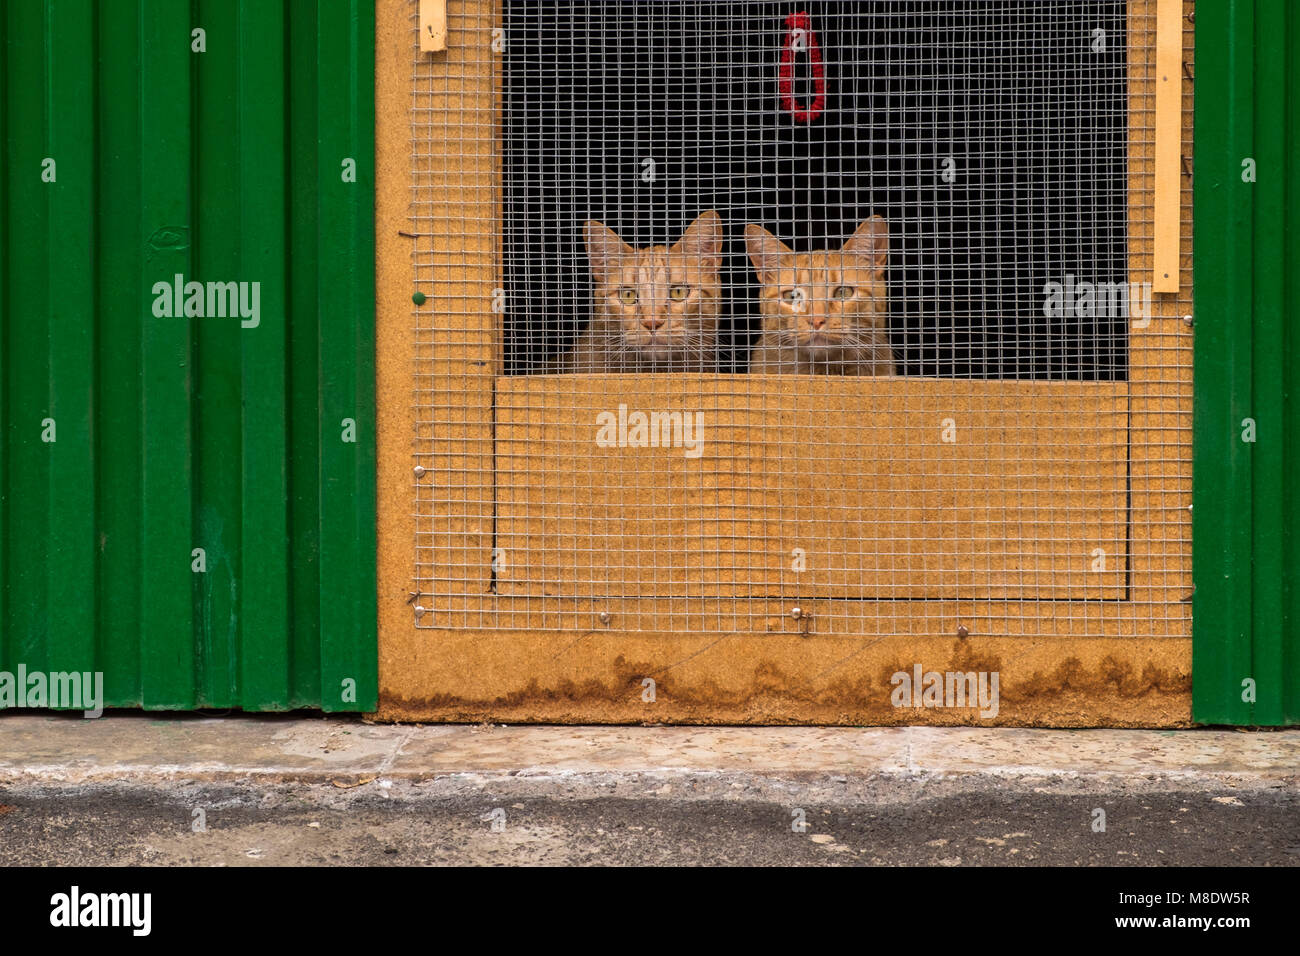 Two ginger cats peering out through a grill in a door, Tamaimo, Tenerife, Canary Islands, Spain Stock Photo